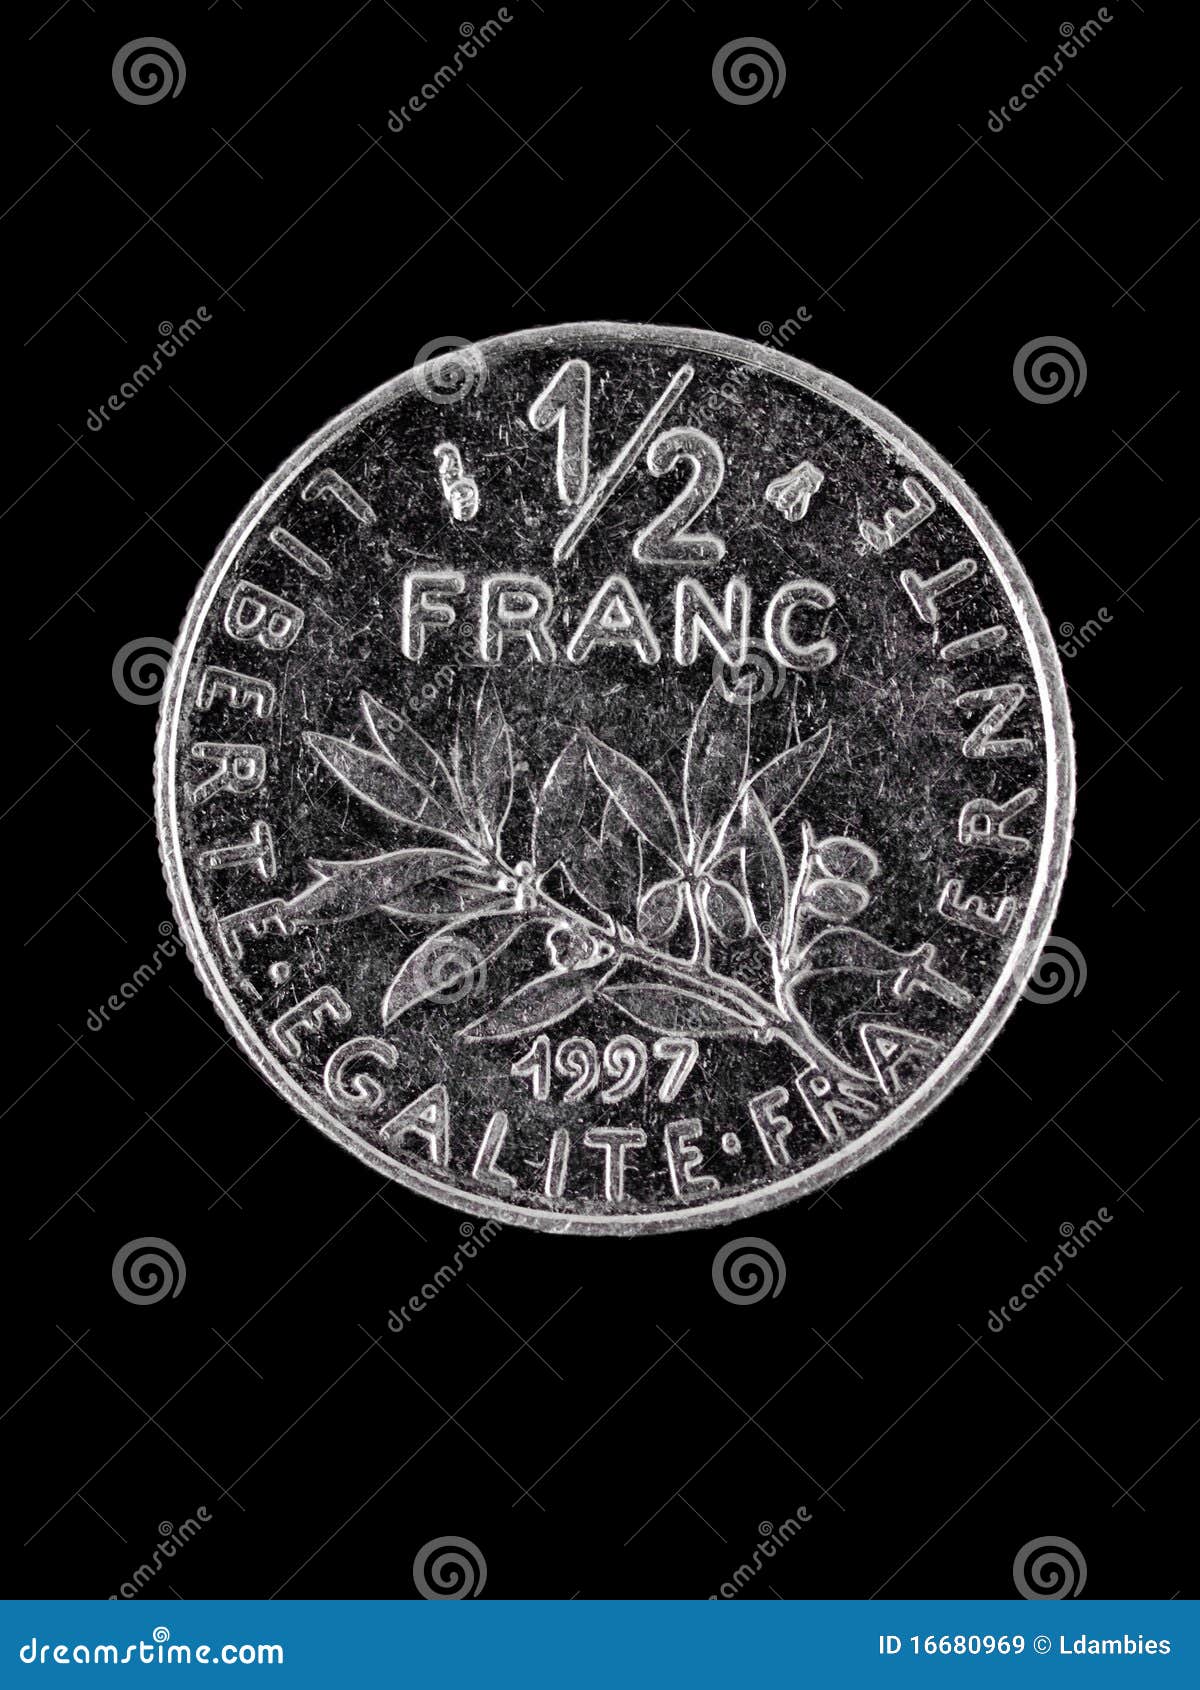 french franc coin